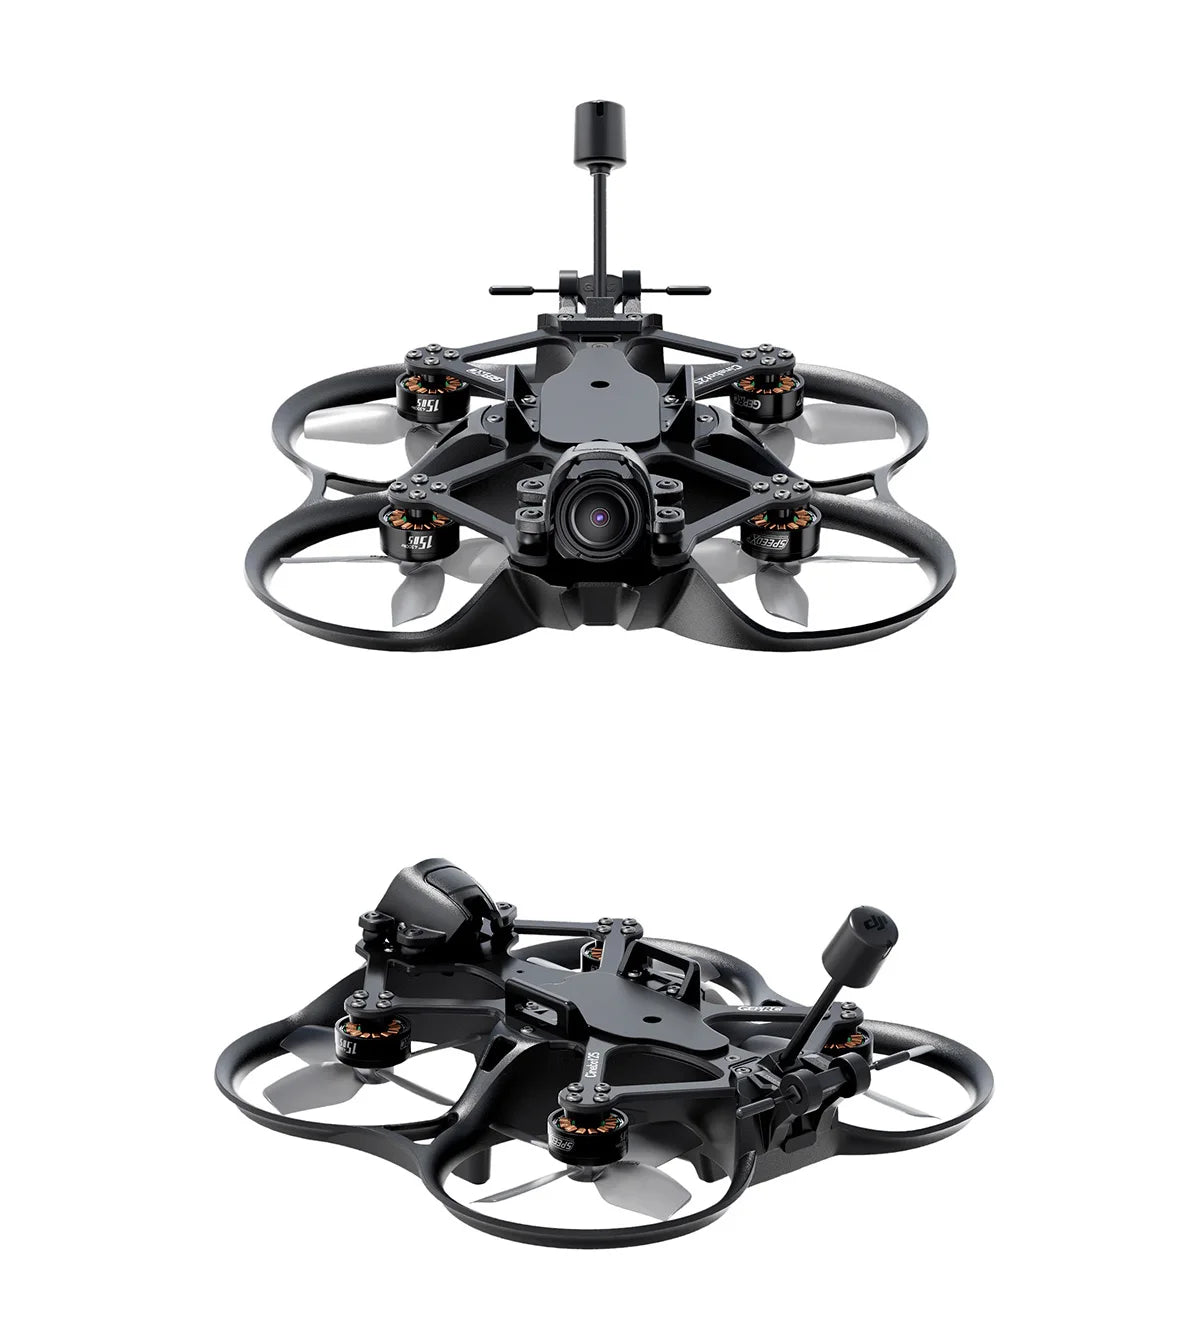 GEPRC Cinebot25 HD O3 FPV Drone, the regular version with the SPEEDX2 1404 motor and the S(sport)